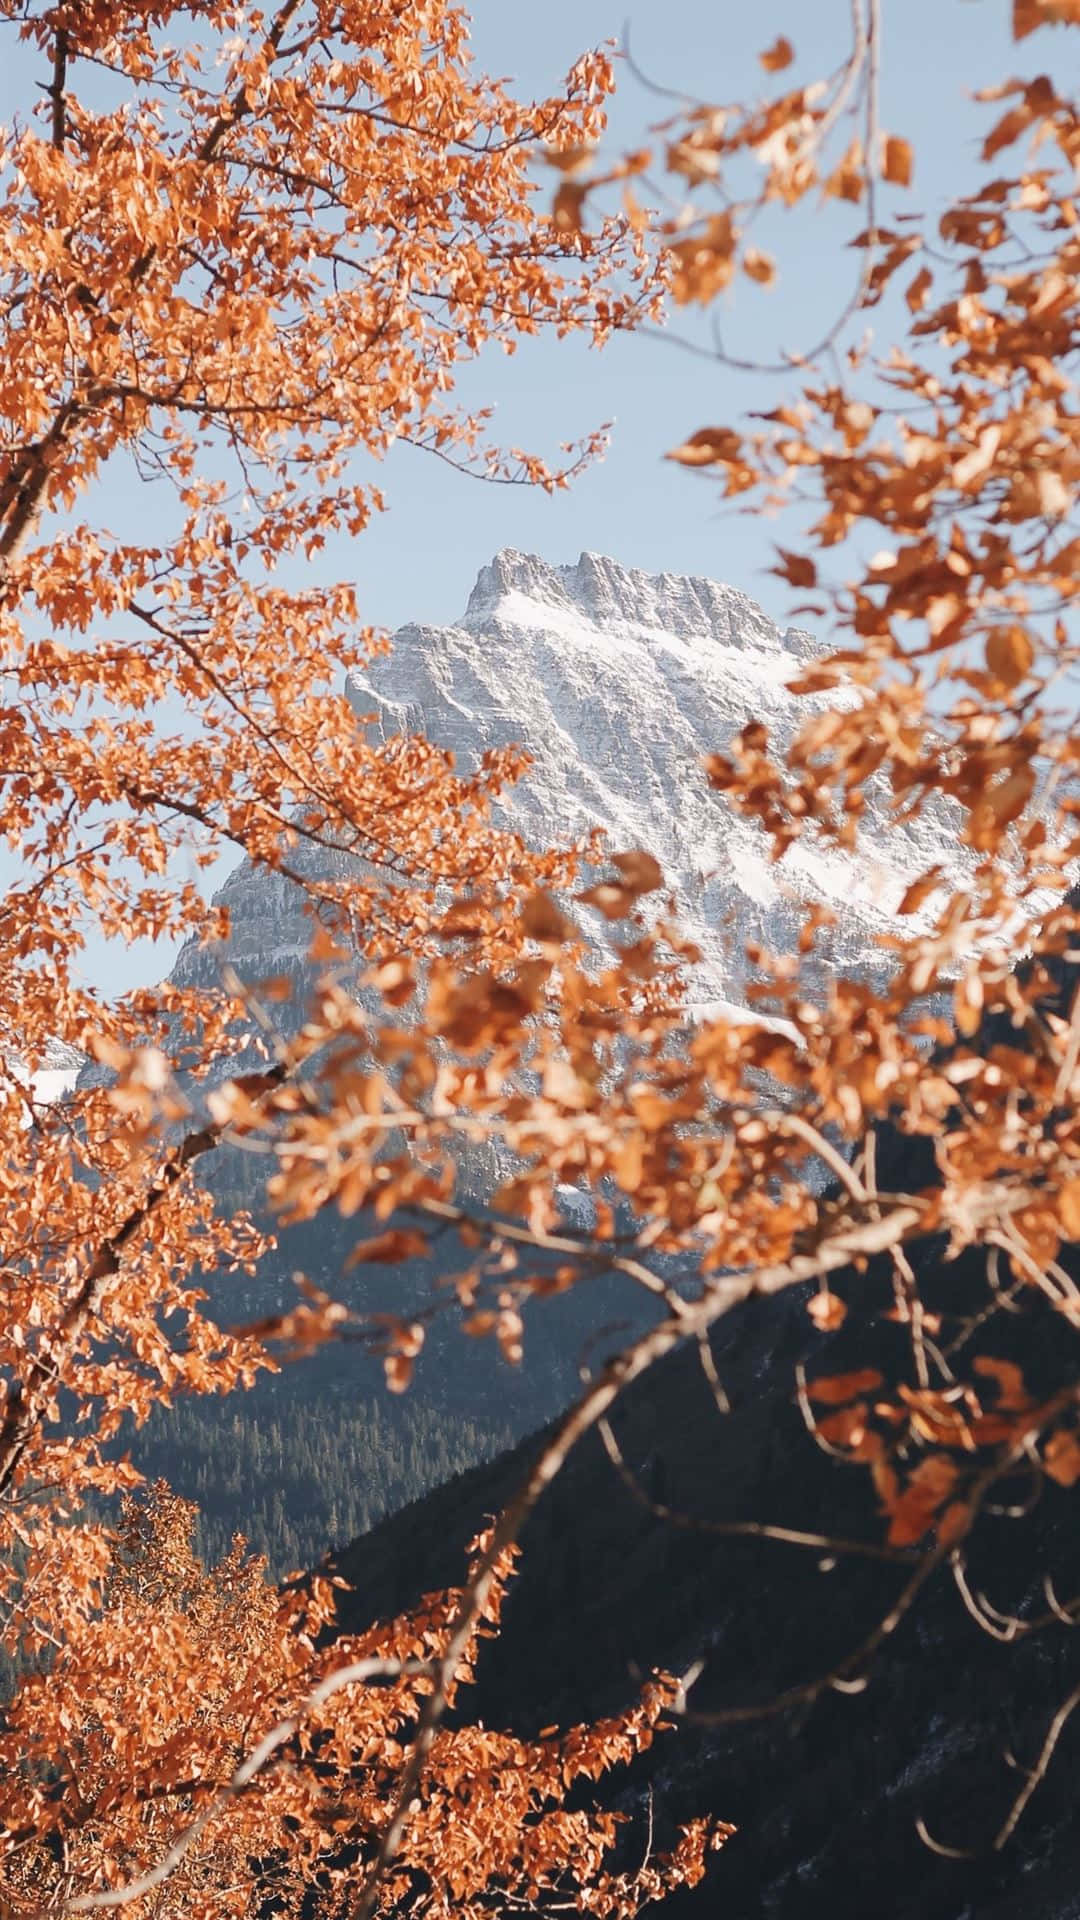 Autumn Iphone 6 Plus With A Snowy Mountain Wallpaper